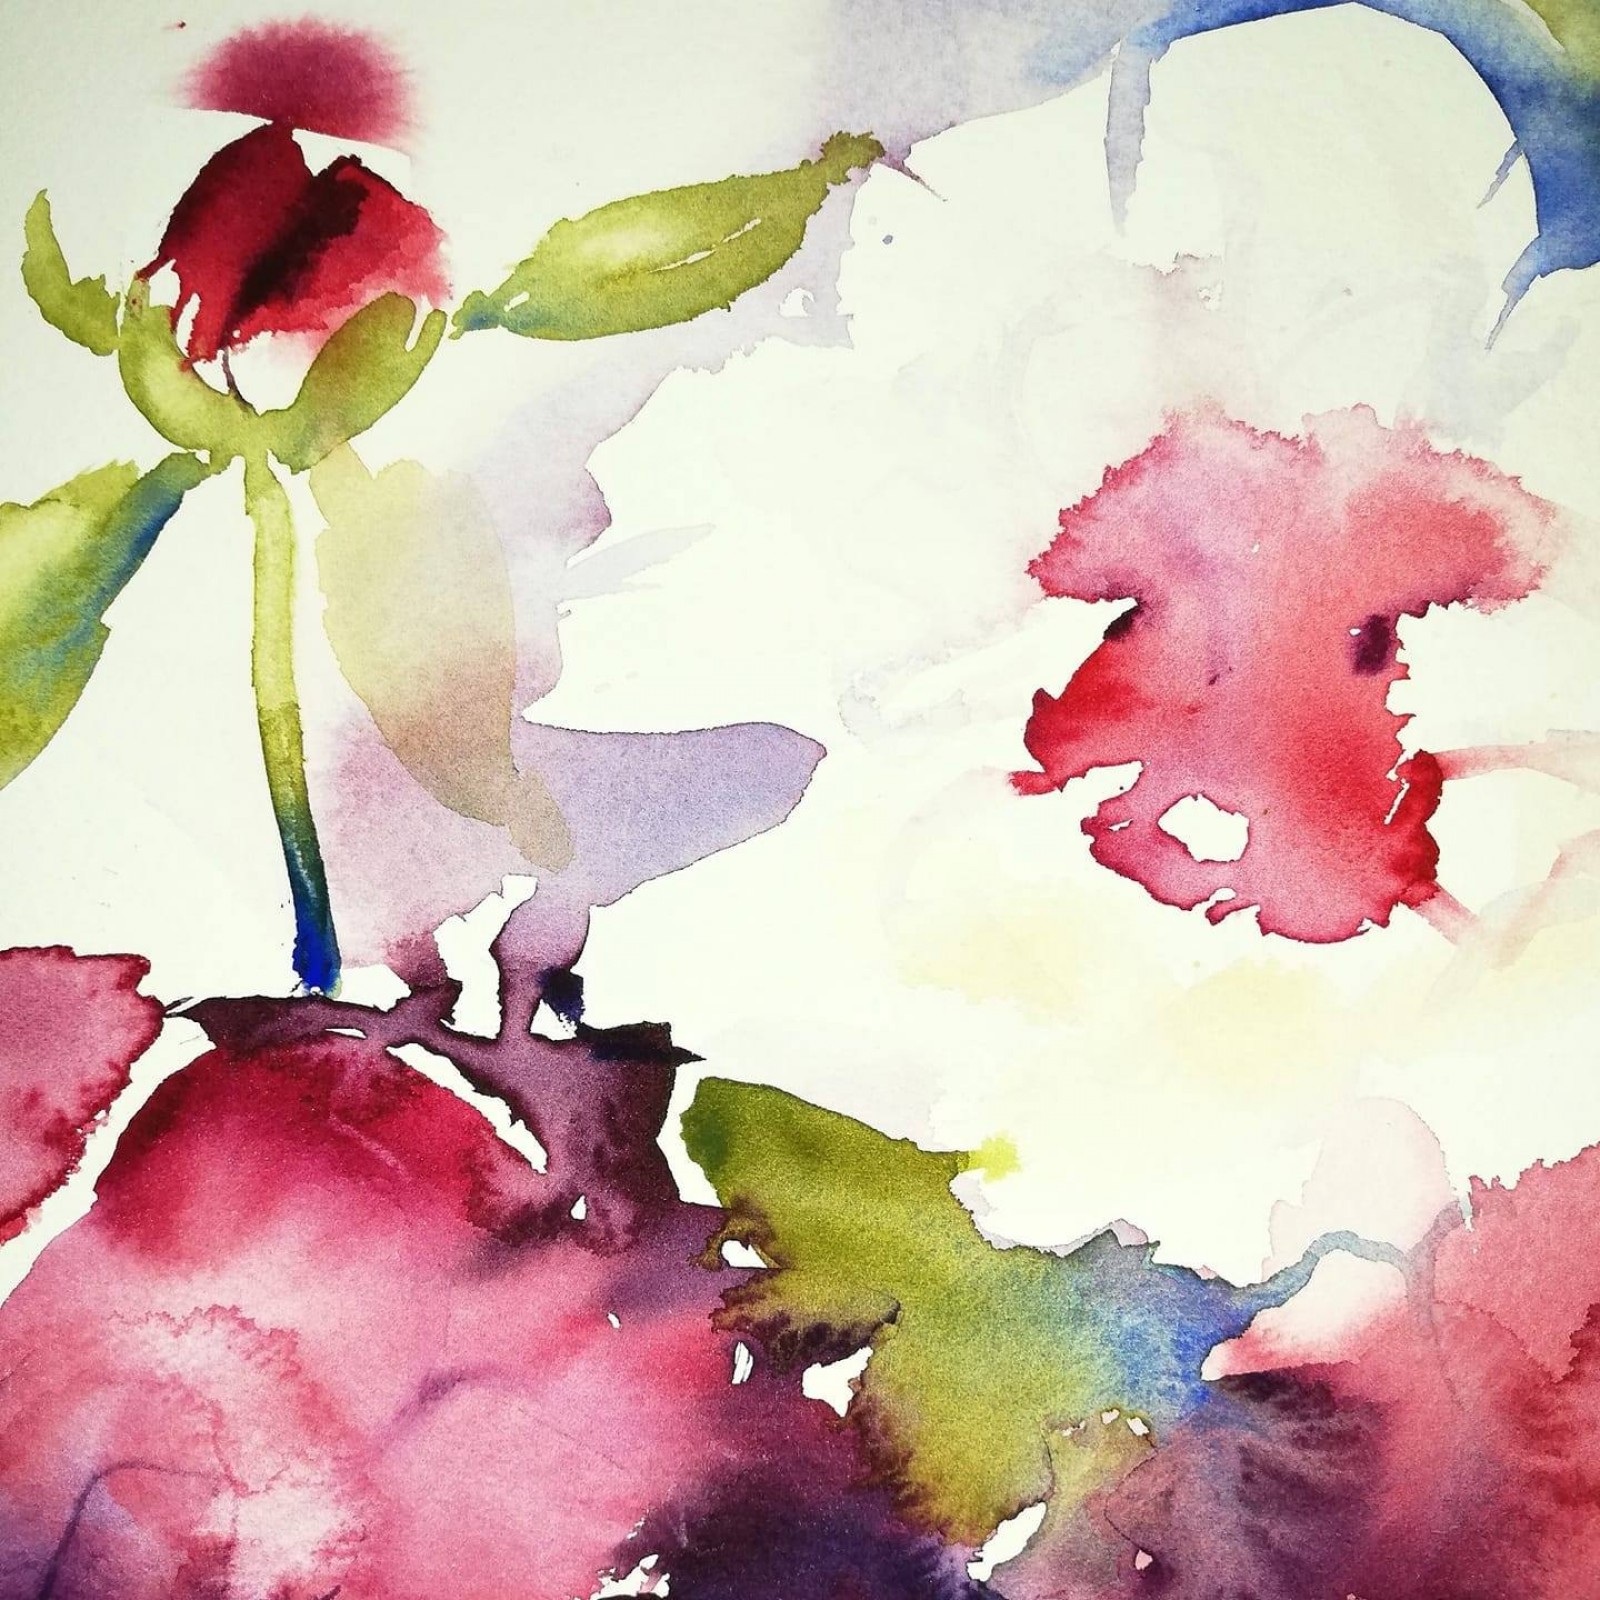 Flowers - Watercolor Painting in Tuscany